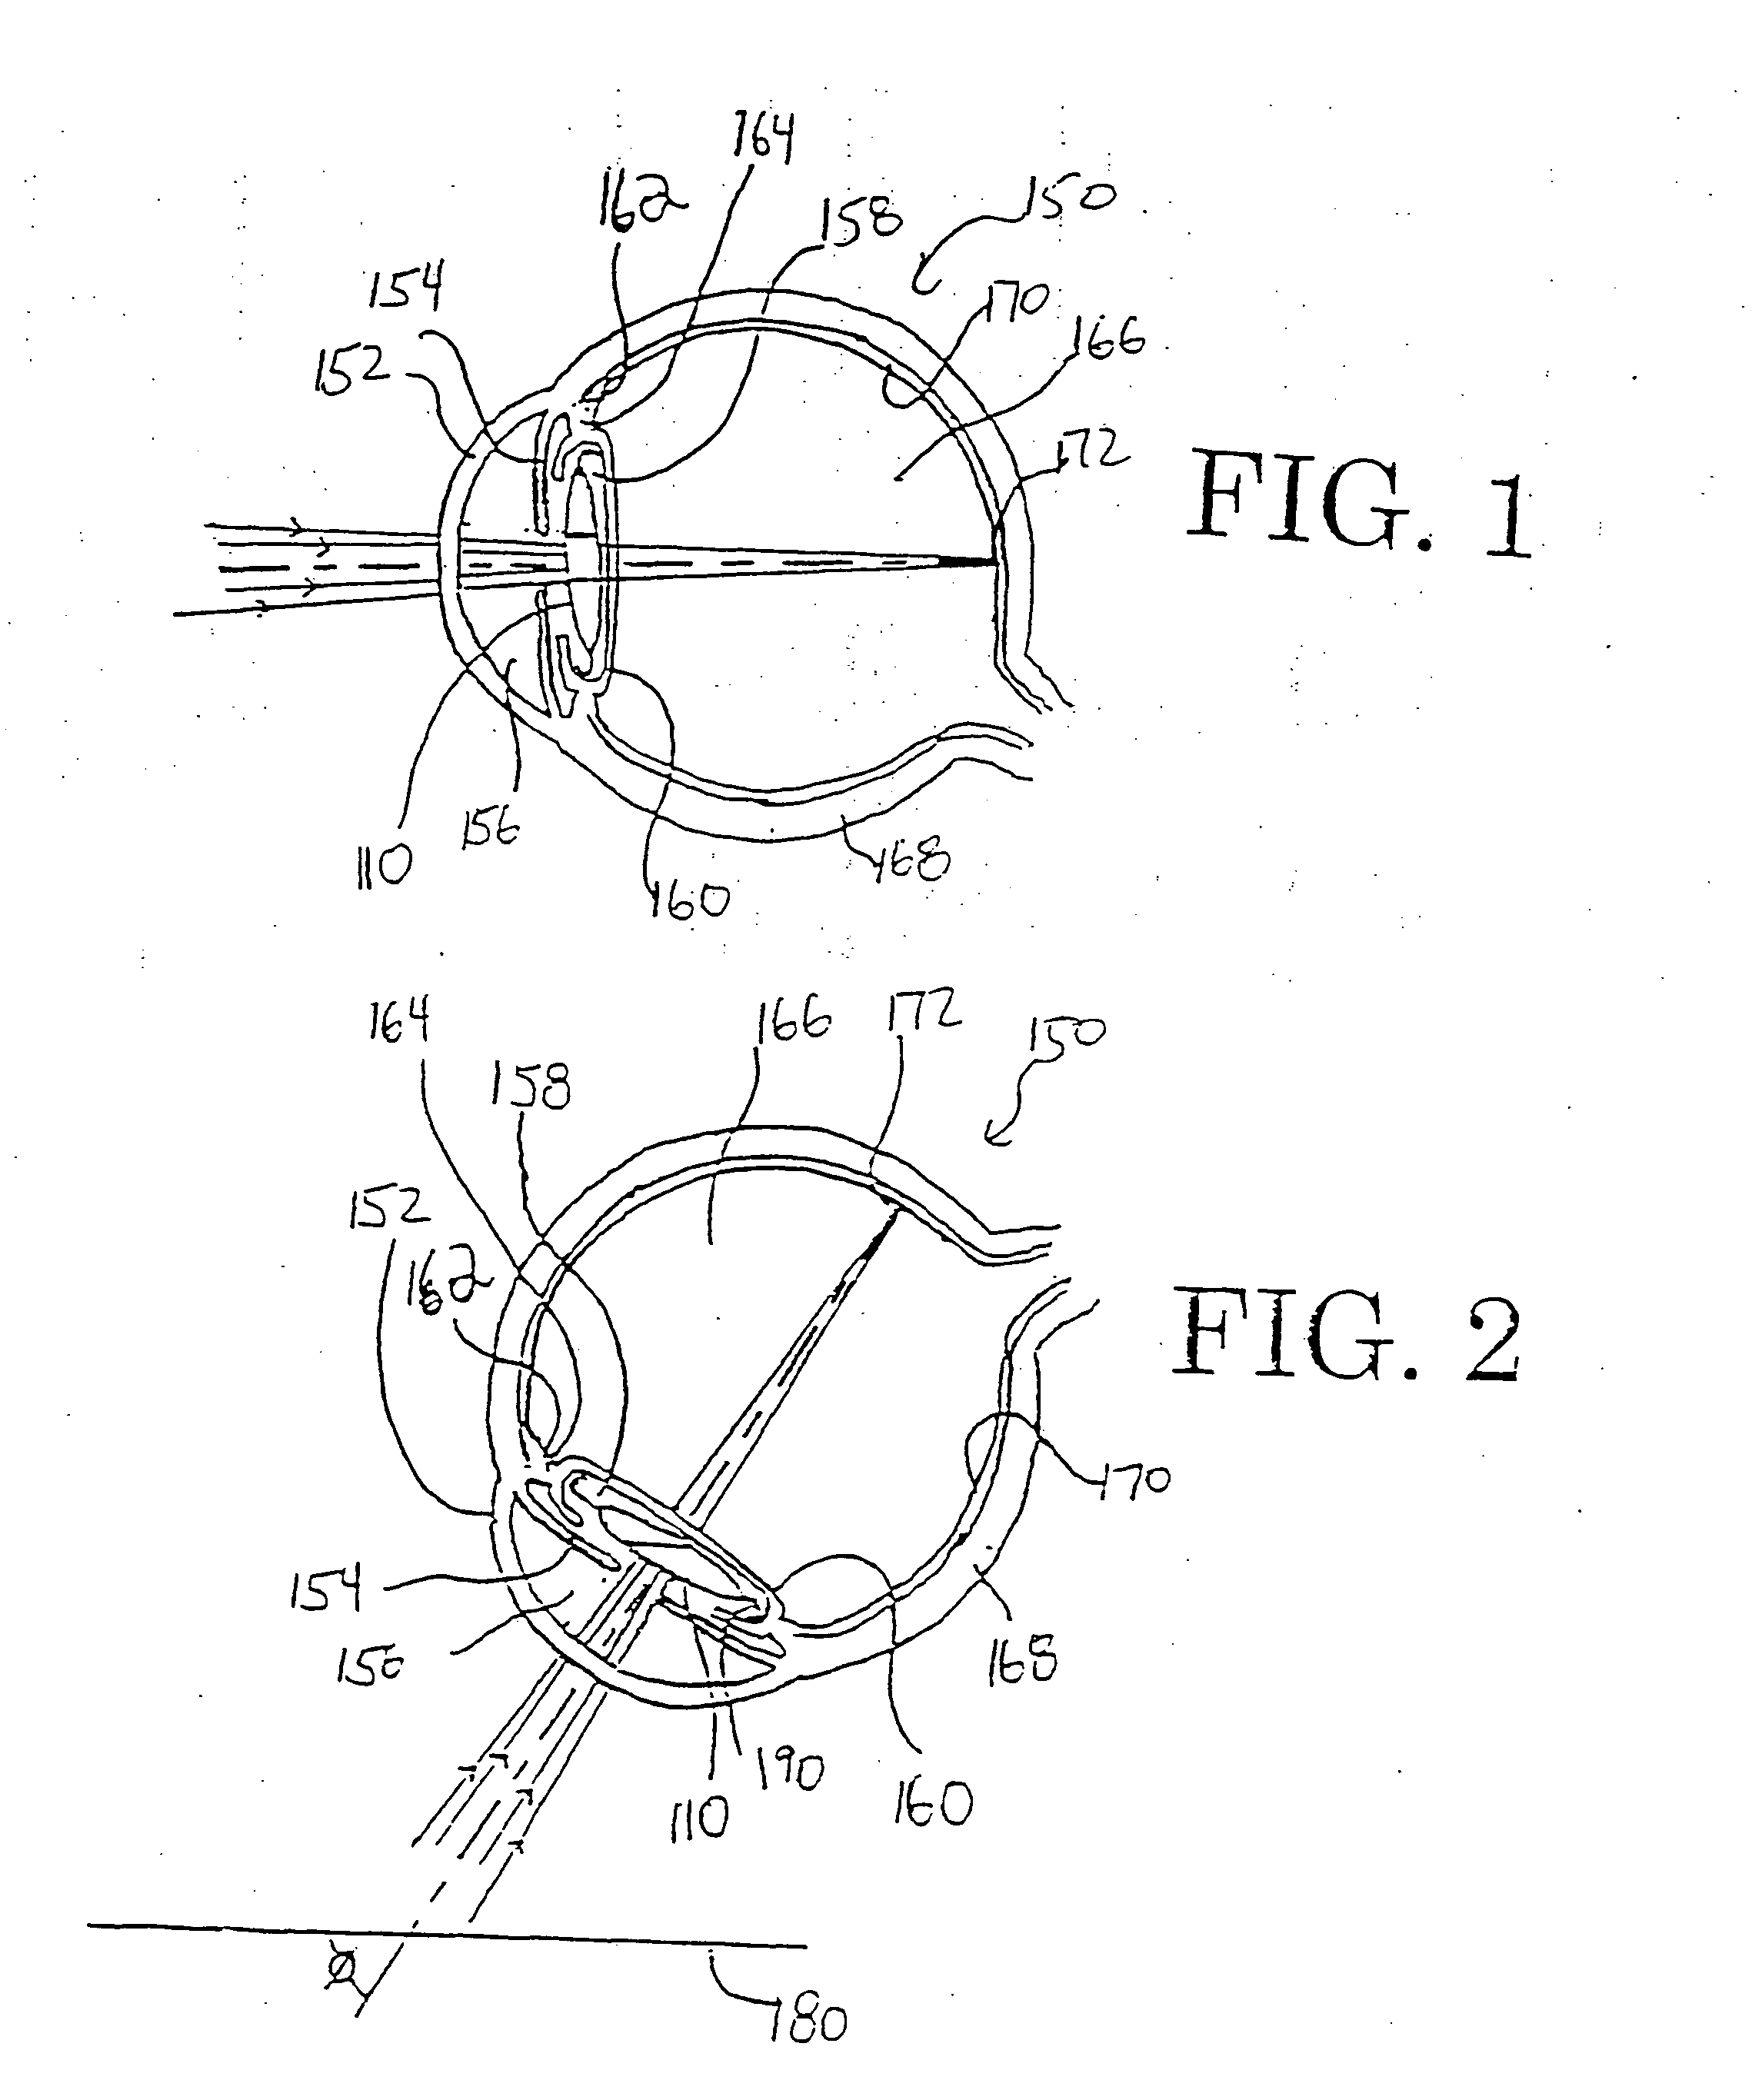 Multi-focal intraocular lens, and methods for making and using same